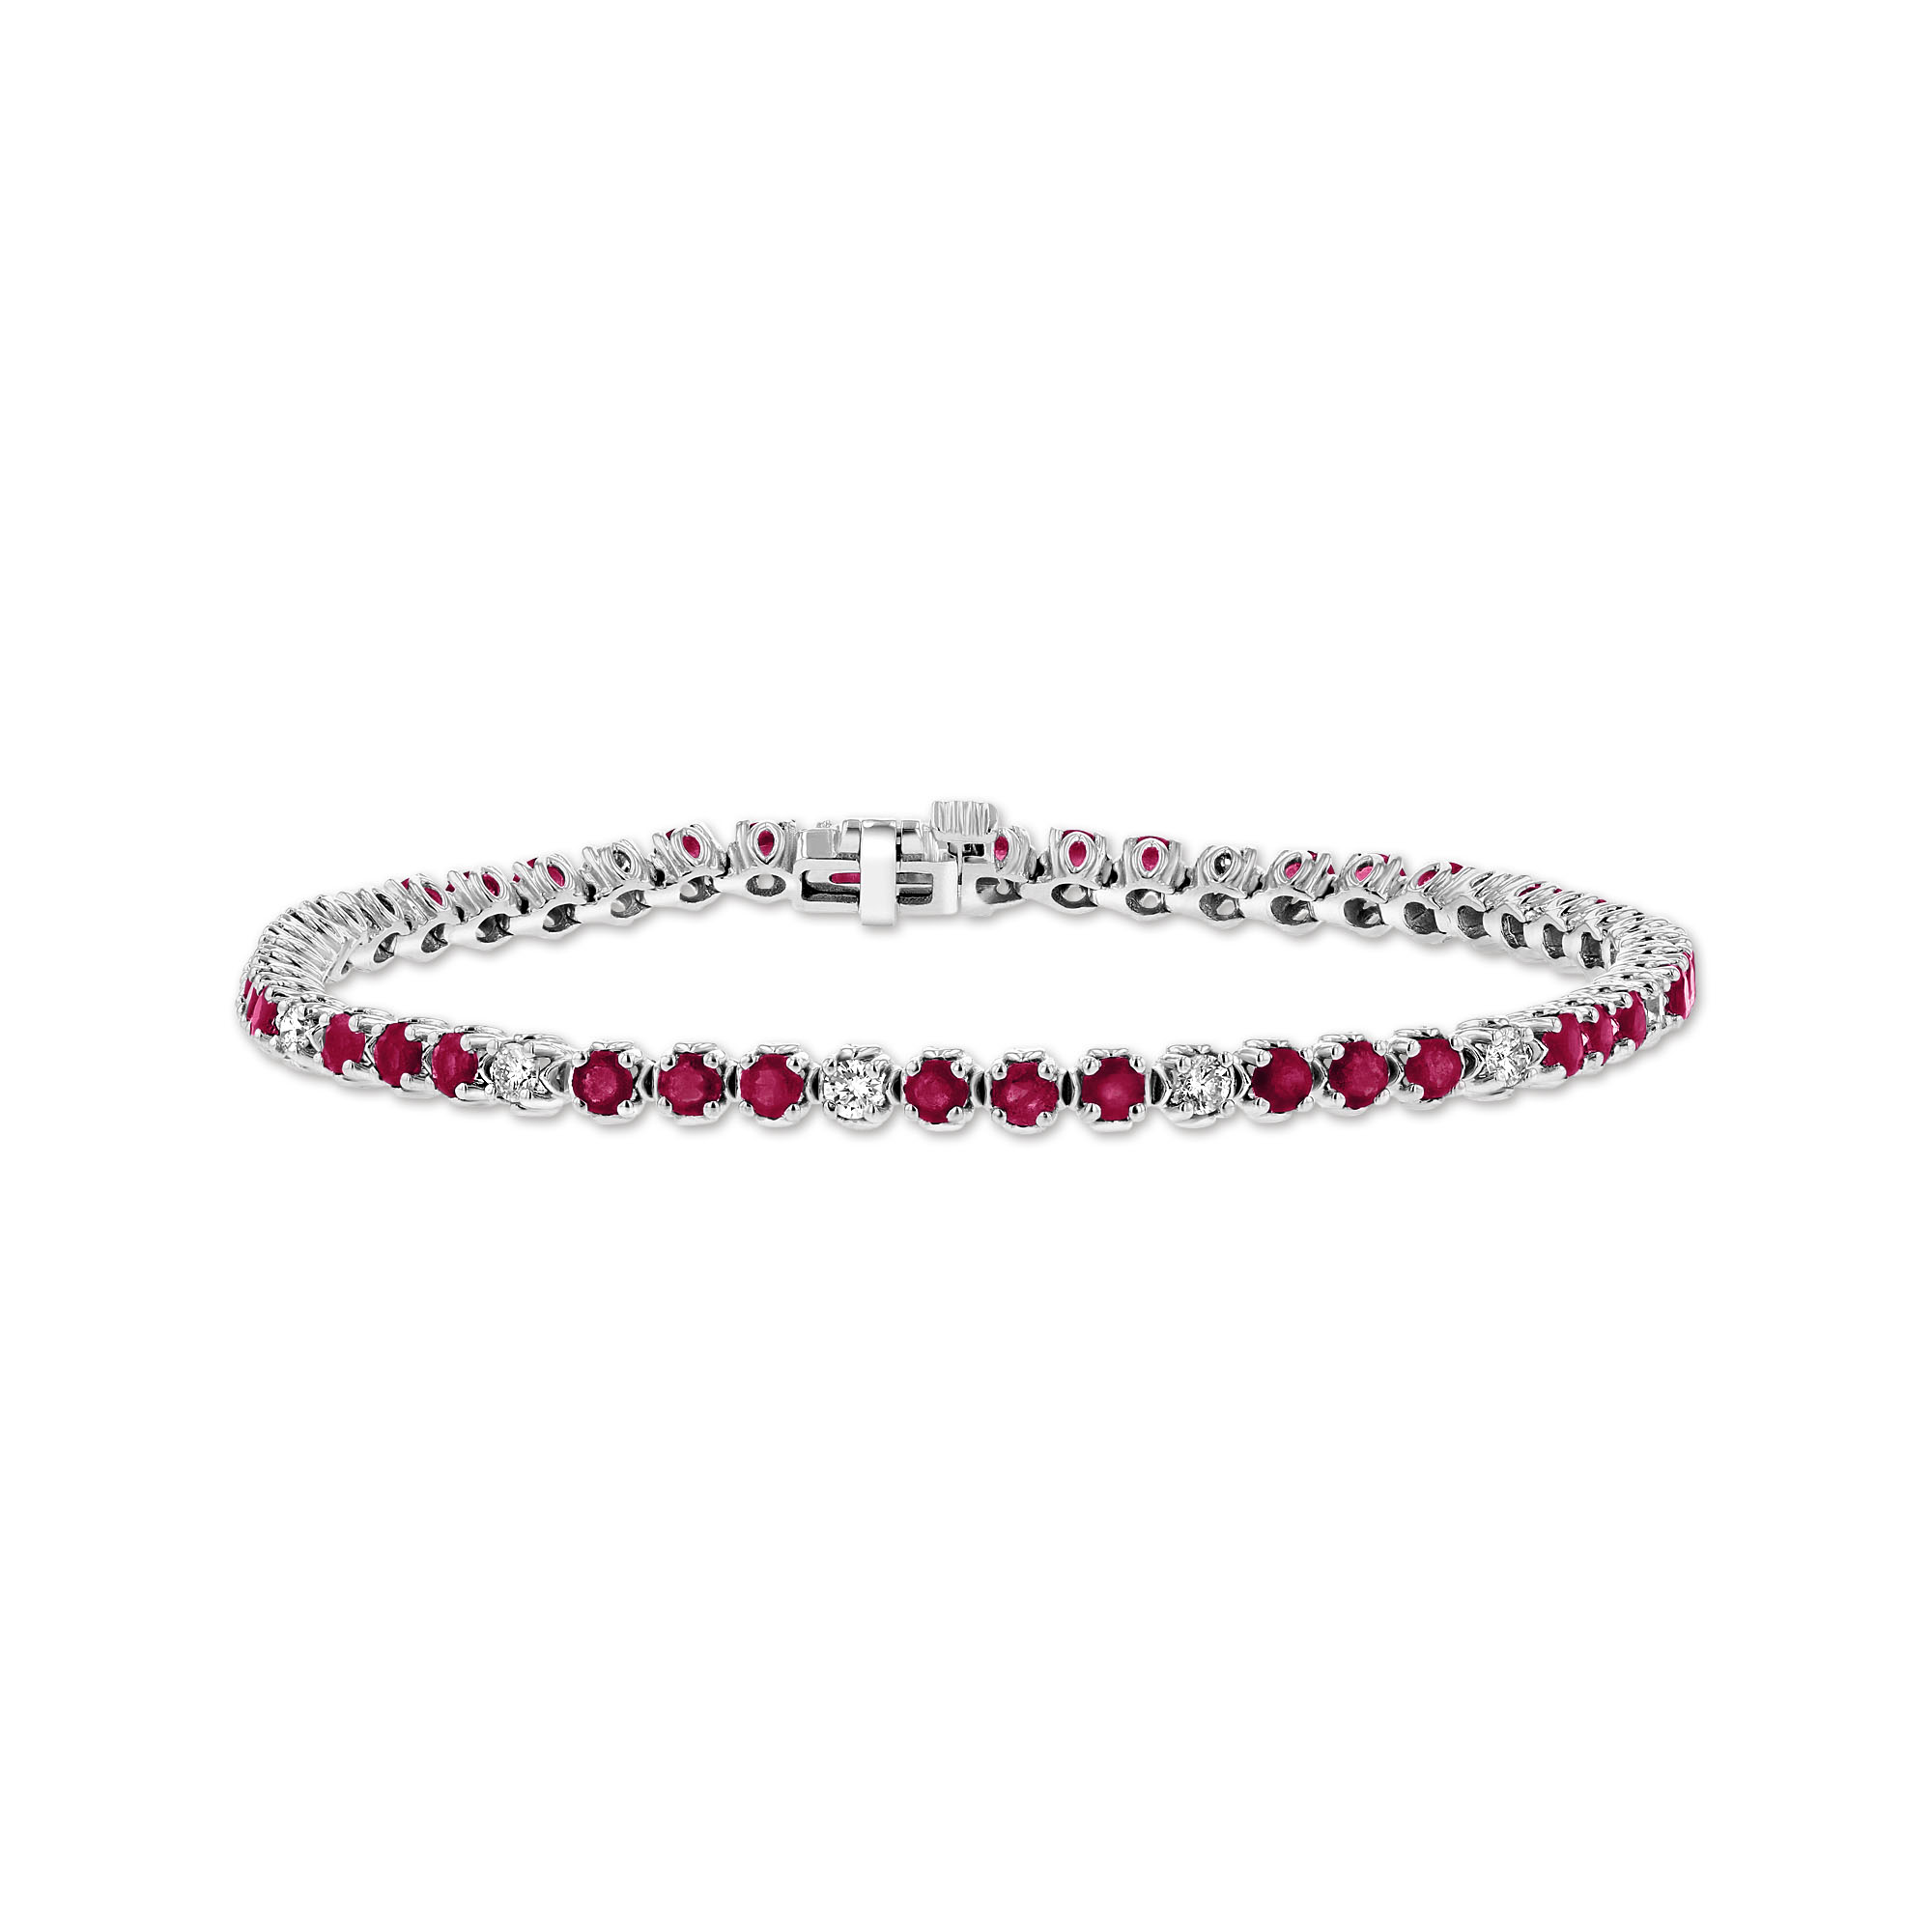 View 3.09ctw Diamond and Ruby Bracelet in 14k White Gold